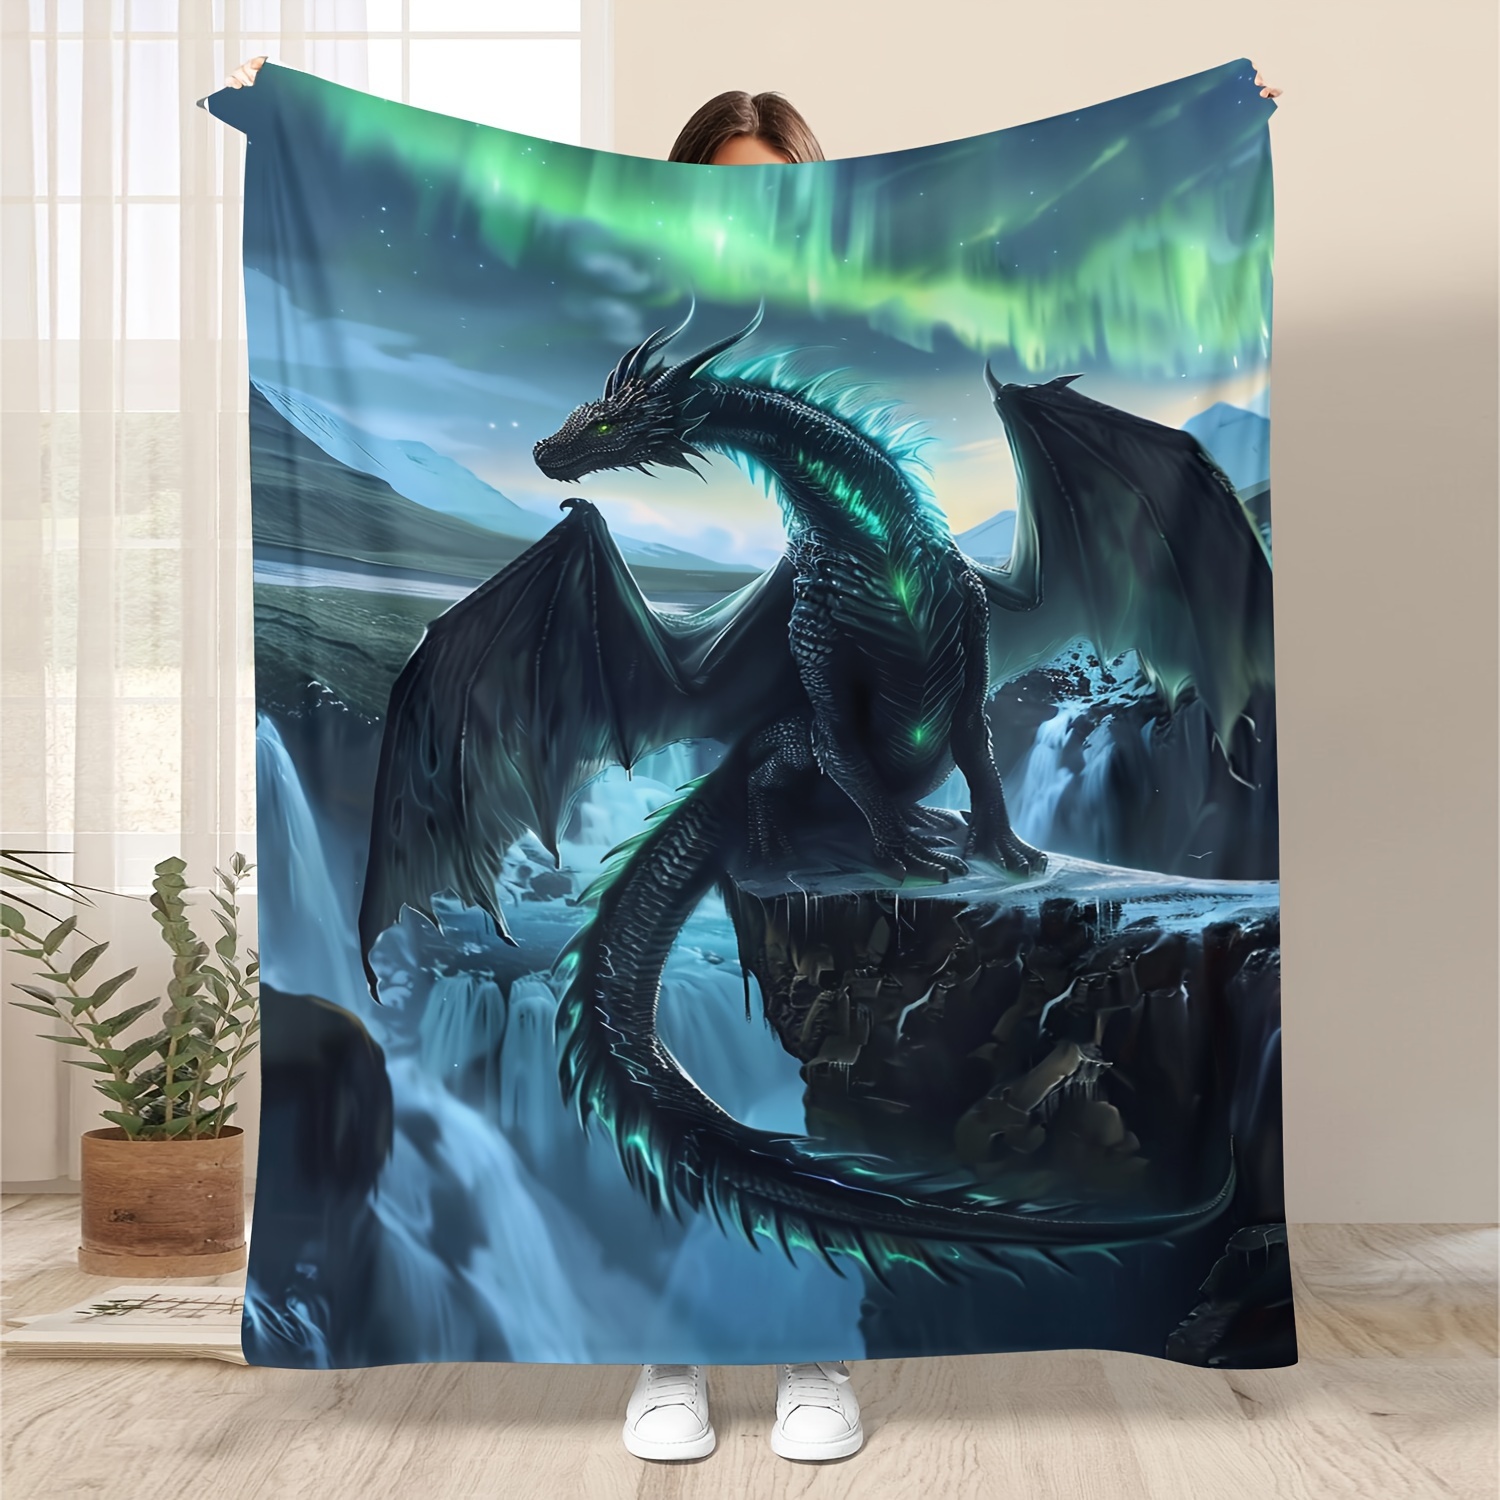 

Cozy Dragon-themed Flannel Throw Blanket - Soft, Warm, And Perfect For Couch, Bed, Office, Or Travel - Ideal Gift For Friends